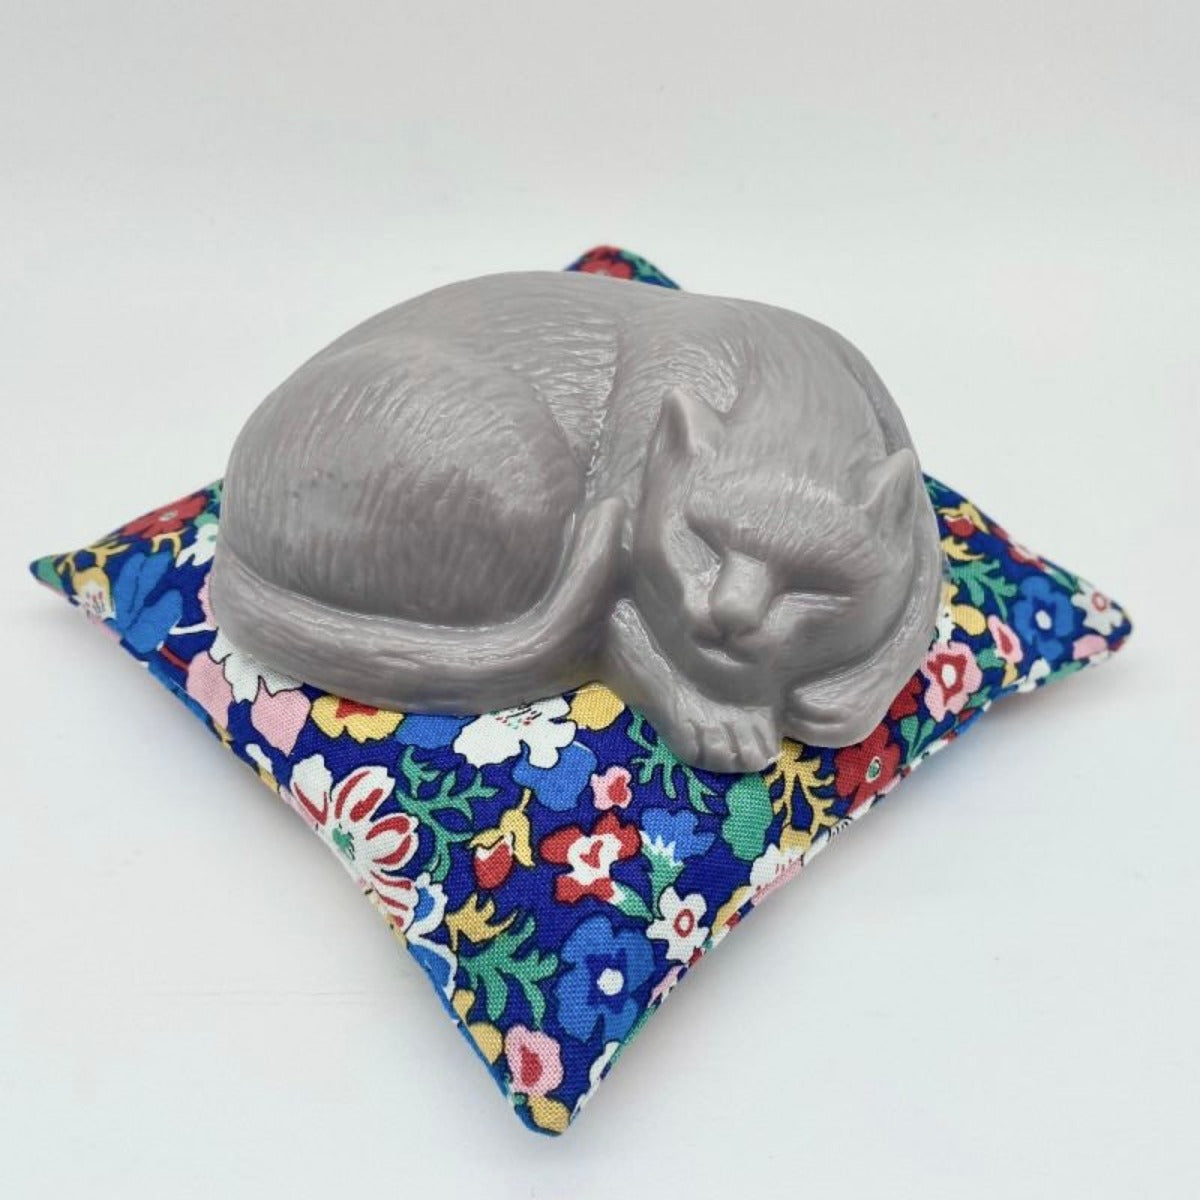 Mindful cat on pillow for cat lover gifts on white background